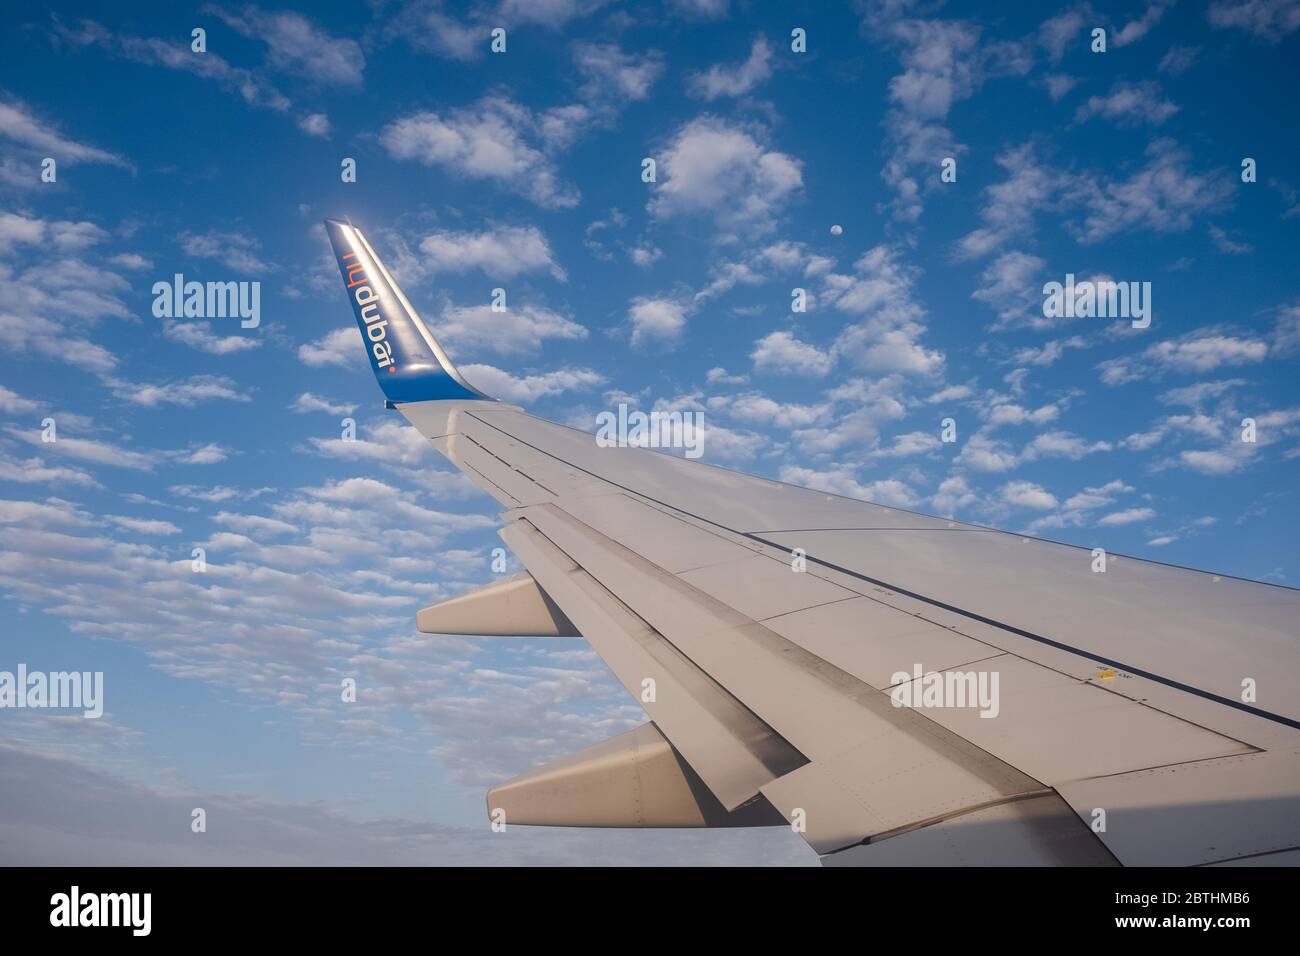 View from a plane window of a wing with flydubai logo,Dubai, United Arab Emirates. Stock Photo